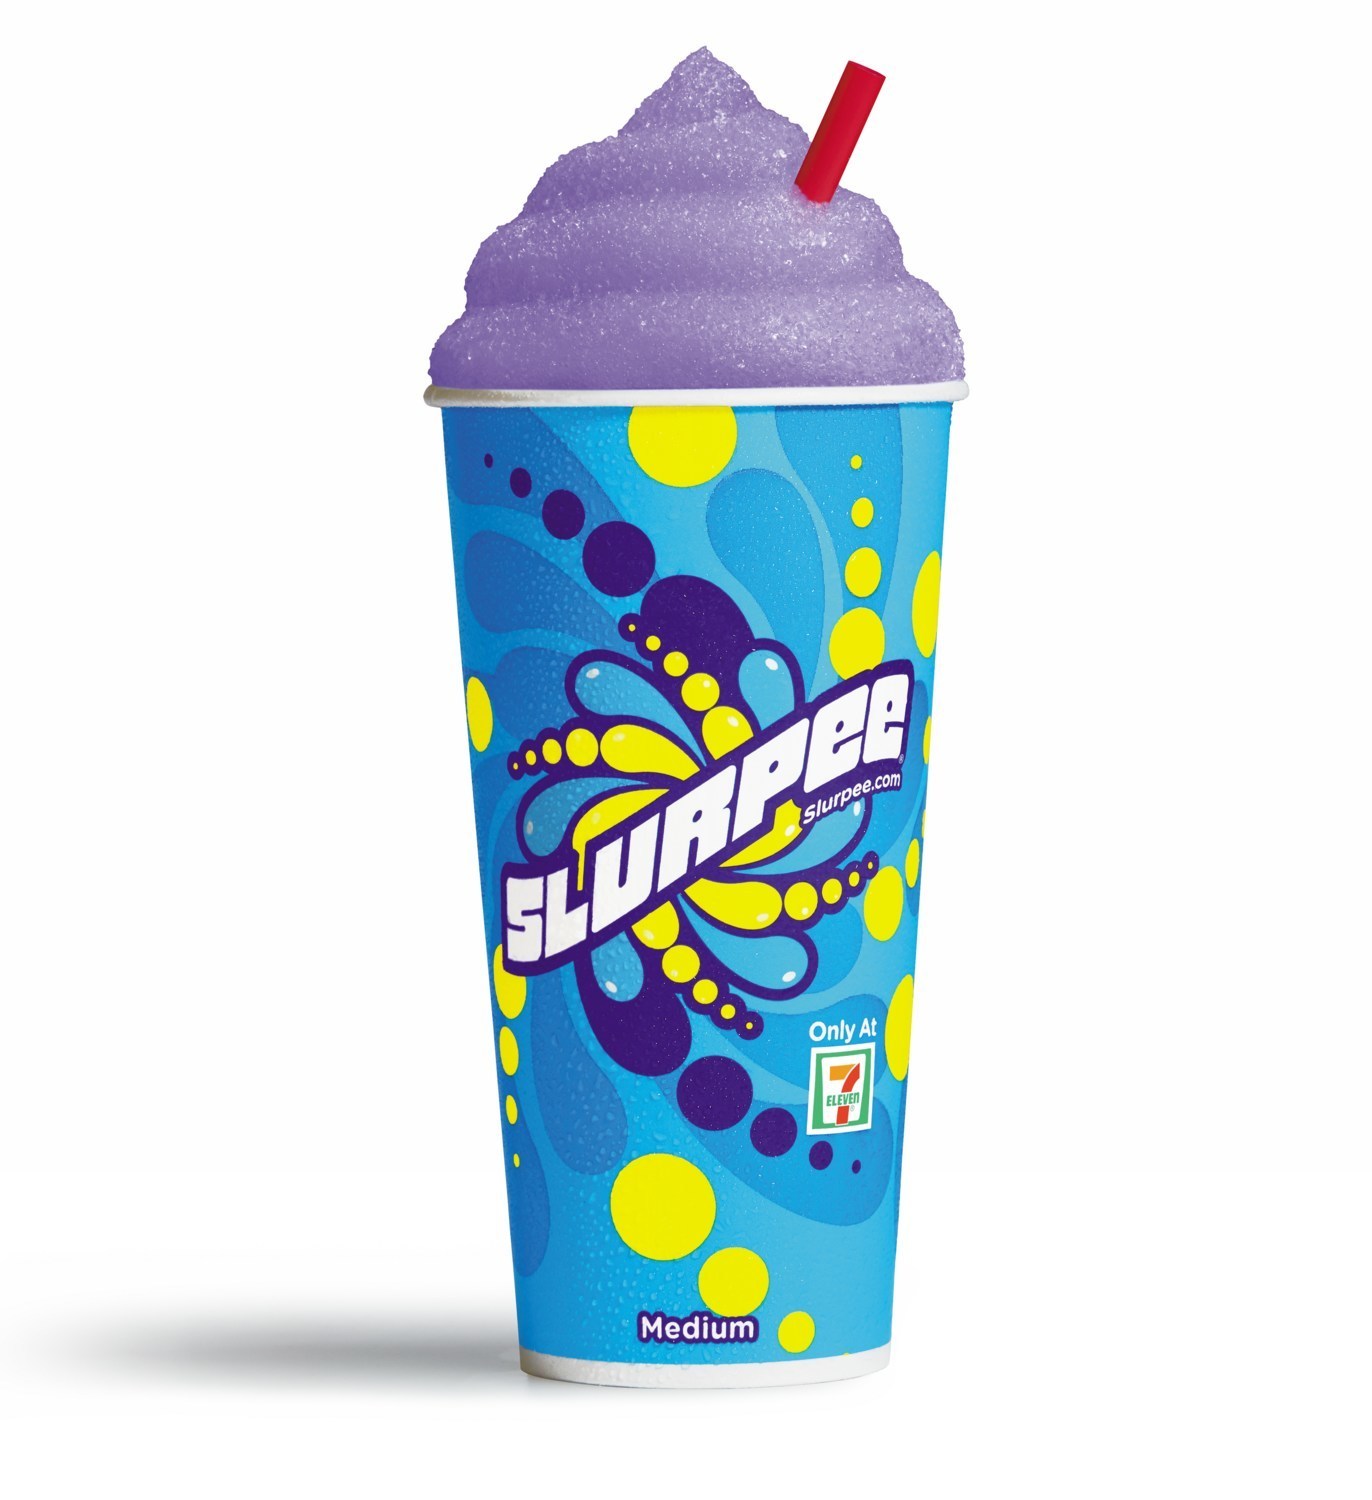 7Eleven has a new spicy watermelonlime Fire Slurpee